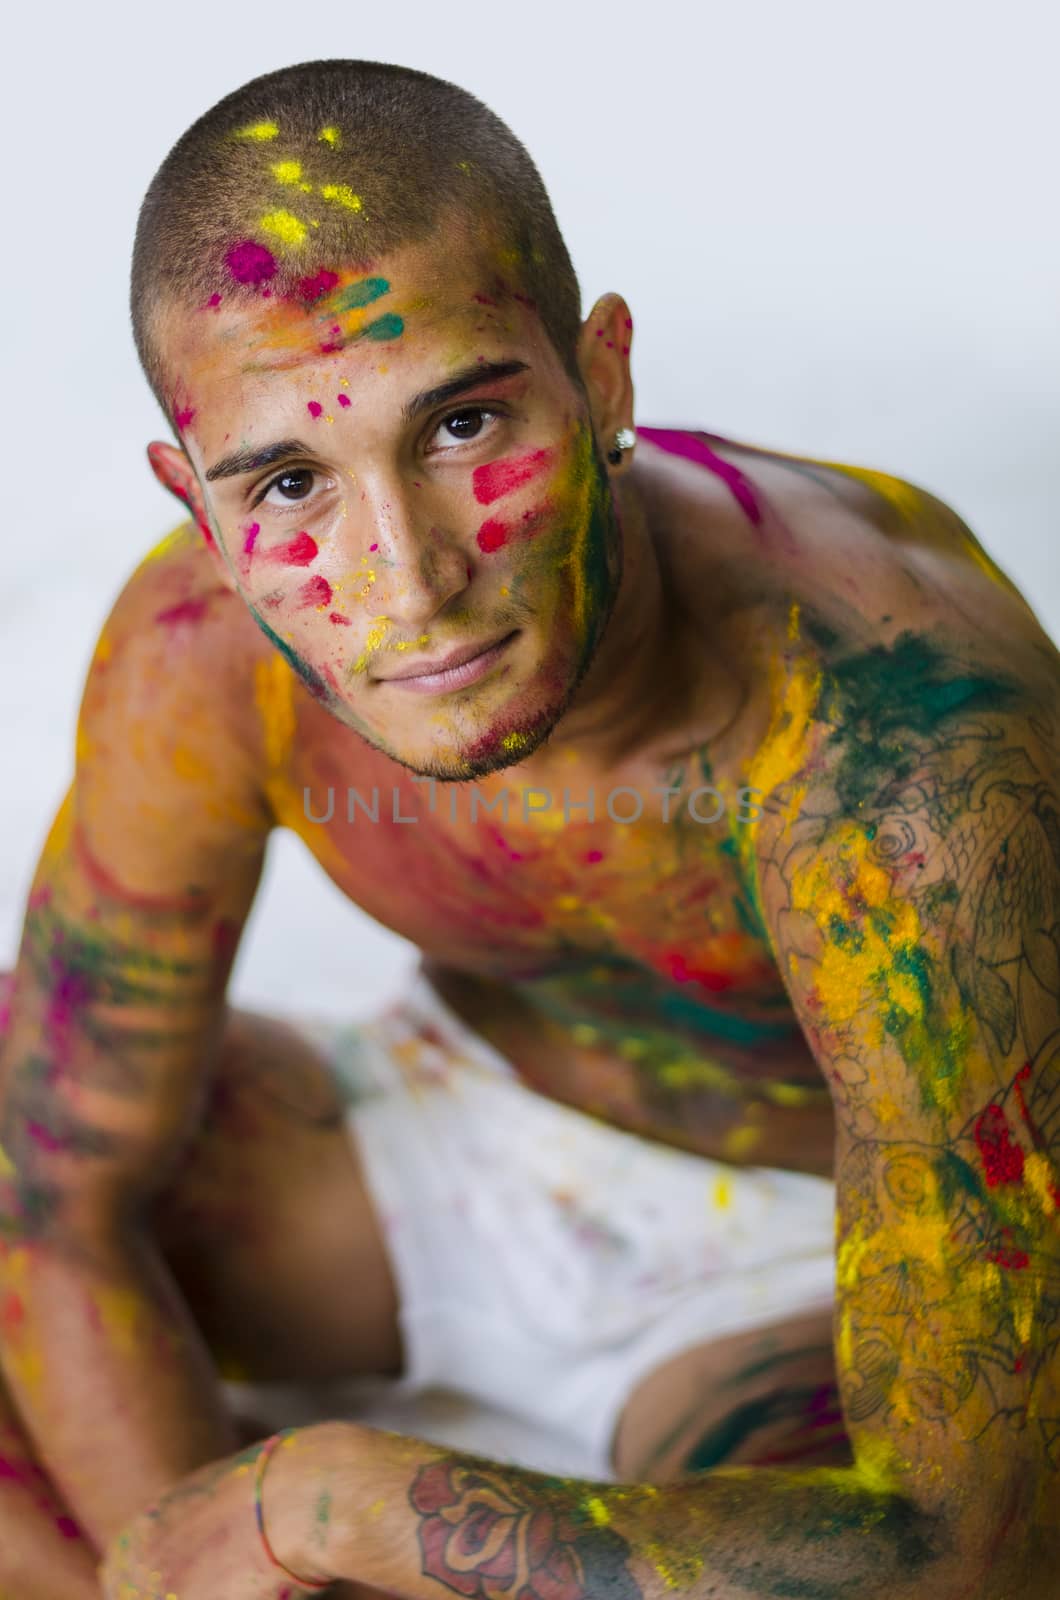 Attractive young man shirtless, skin painted all over with bright Holi colors, looking at camera, sitting, on white background